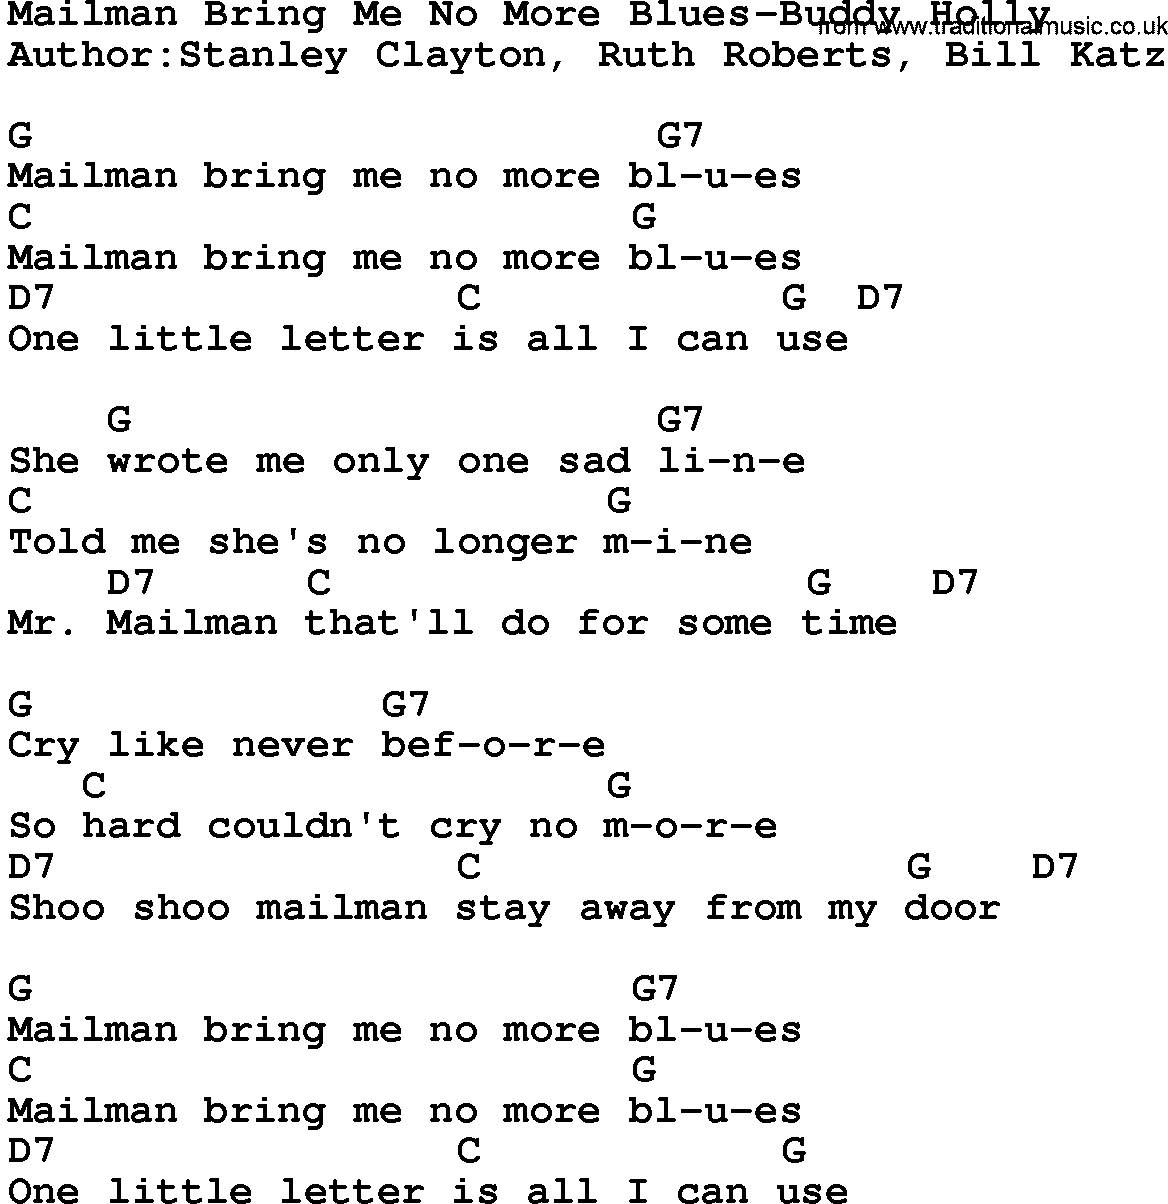 Country music song: Mailman Bring Me No More Blues-Buddy Holly lyrics and chords